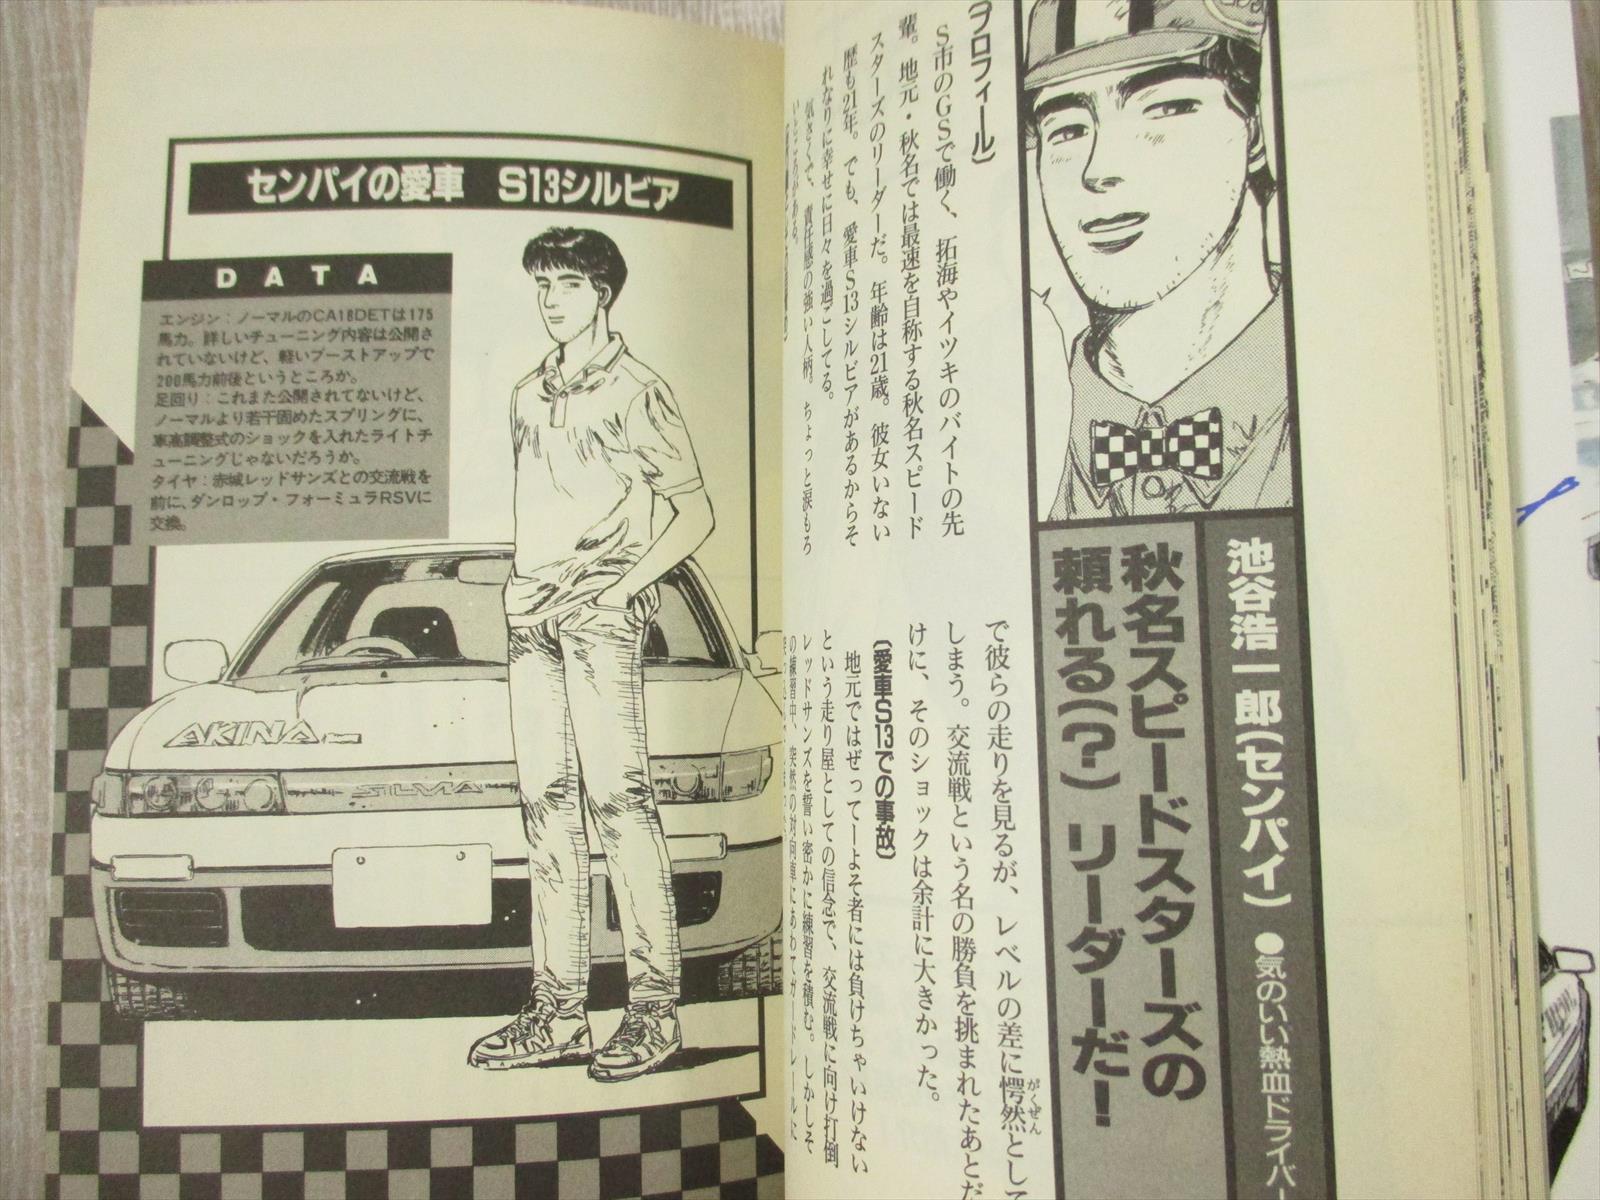 Initial D Official Guide Dori Dori Drivers Text W Poster Postcard Art Book Ko39 Other Japanese Anime Whitlockmillsjc Collectables